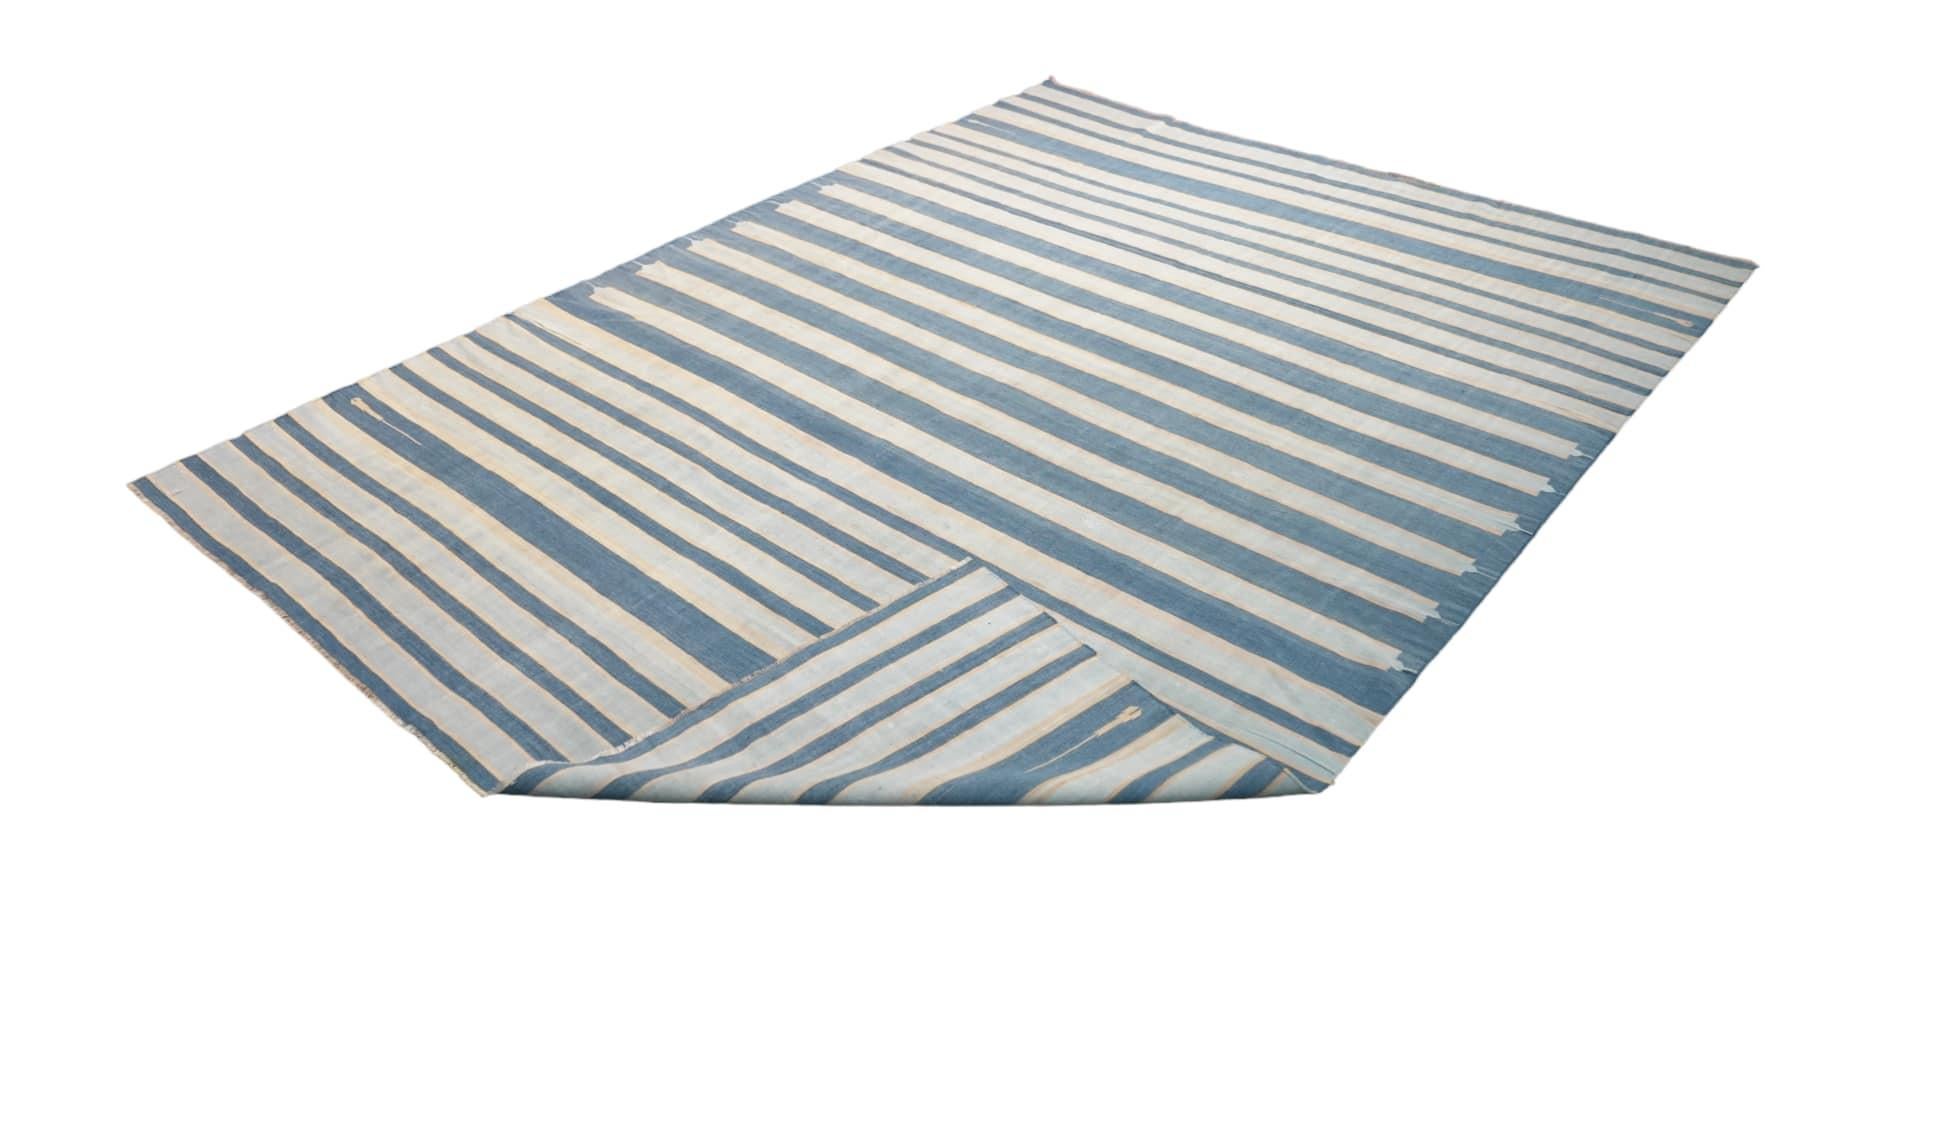 Indian Vintage Dhurrie Rug, with Blue Geometric Stripes, from Rug & Kilim For Sale